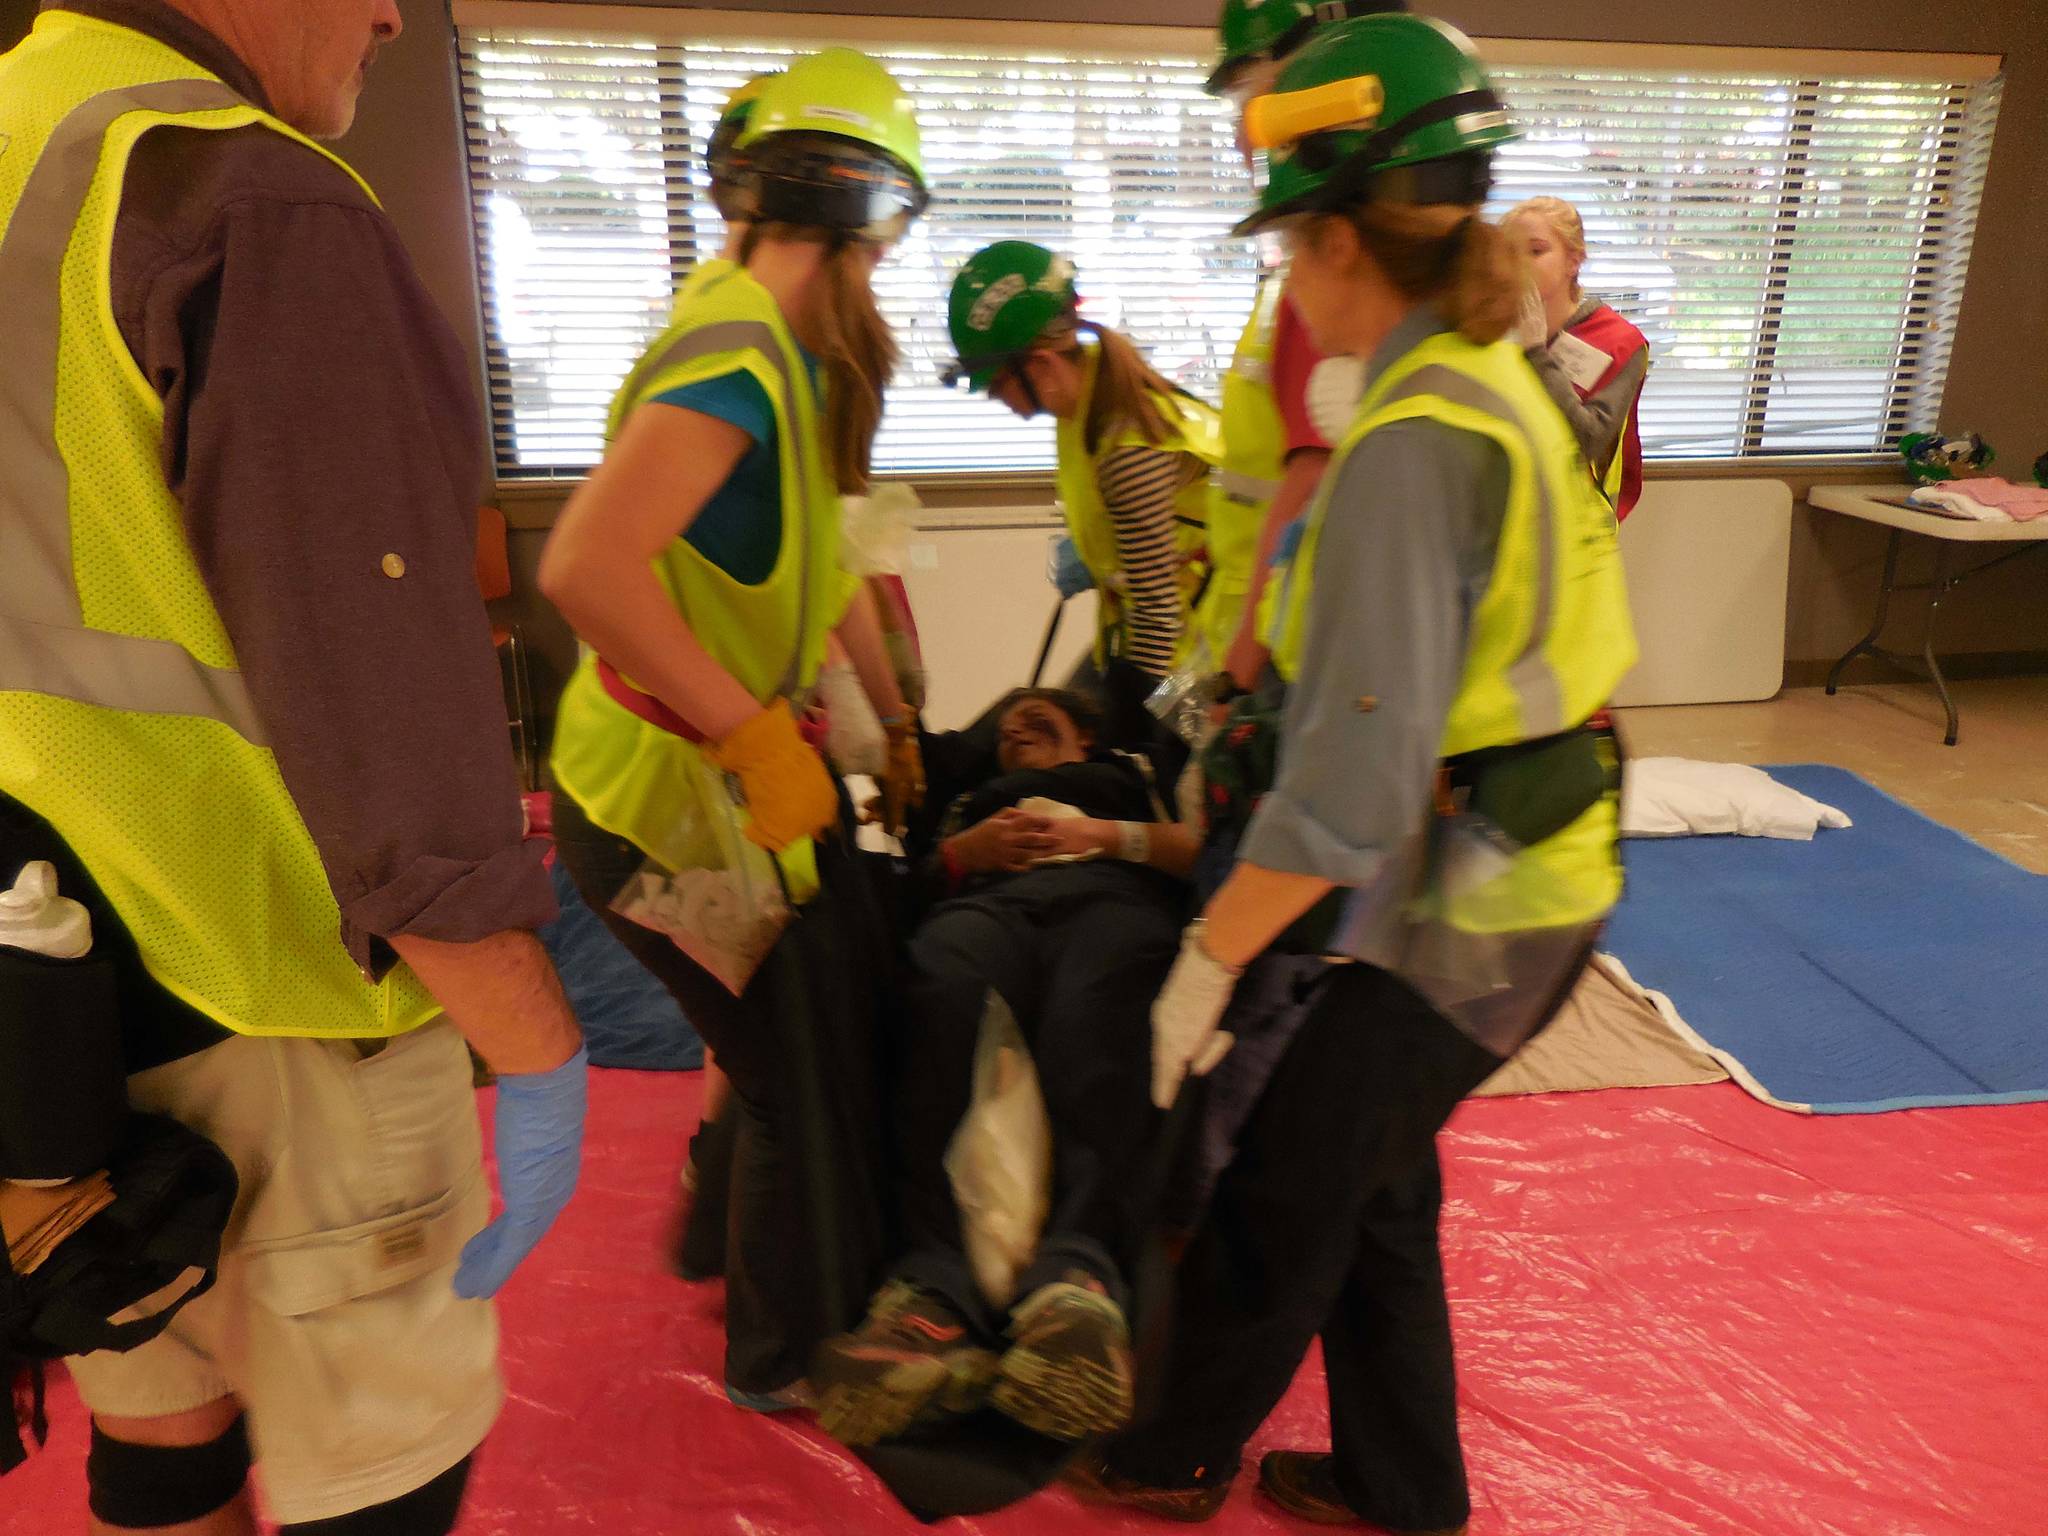 CERT is seeking 27 volunteers to play “survivors” in the Nov. 18 disaster simulation drill. Courtesy of Christina Brugman